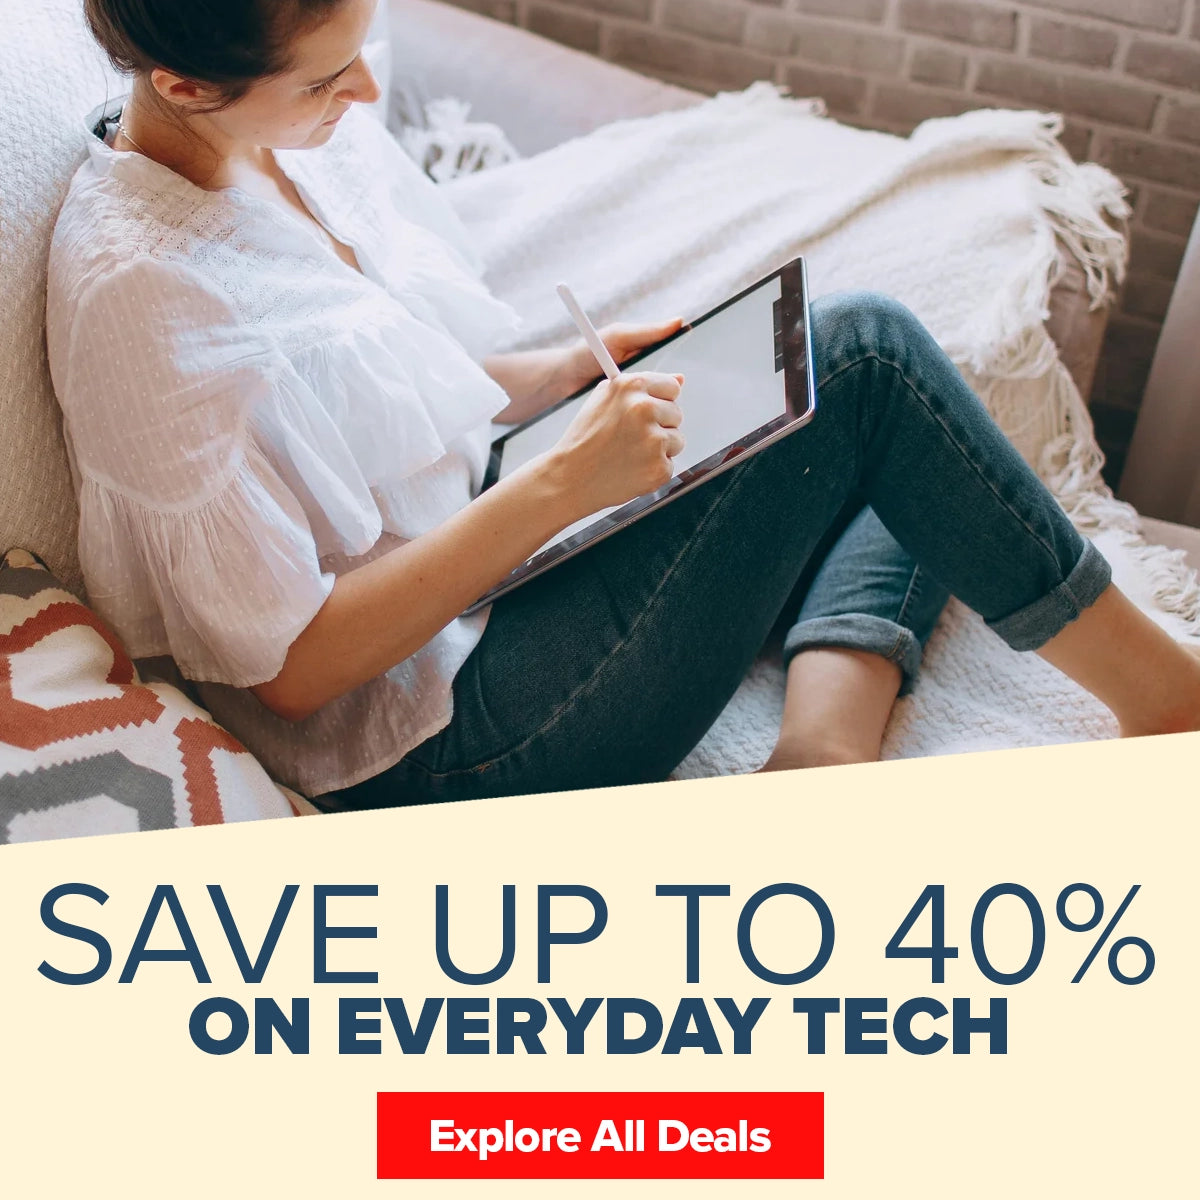 Save up to 40% on everyday tech